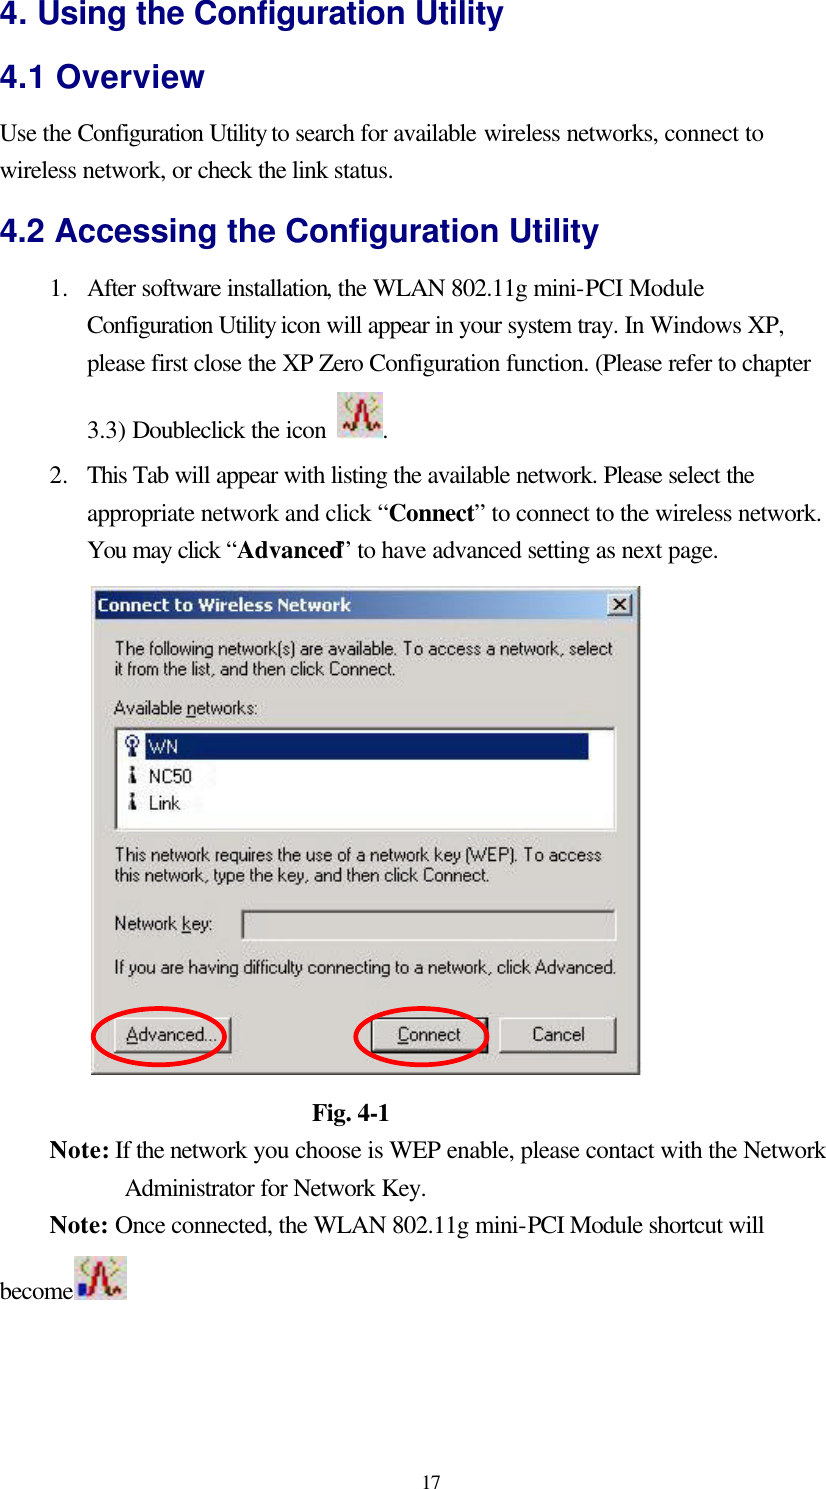  17 4. Using the Configuration Utility 4.1 Overview Use the Configuration Utility to search for available wireless networks, connect to wireless network, or check the link status. 4.2 Accessing the Configuration Utility 1.  After software installation, the WLAN 802.11g mini-PCI Module Configuration Utility icon will appear in your system tray. In Windows XP, please first close the XP Zero Configuration function. (Please refer to chapter 3.3) Doubleclick the icon  .   2.  This Tab will appear with listing the available network. Please select the appropriate network and click “Connect” to connect to the wireless network. You may click “Advanced” to have advanced setting as next page.                       Fig. 4-1 Note: If the network you choose is WEP enable, please contact with the Network Administrator for Network Key. Note: Once connected, the WLAN 802.11g mini-PCI Module shortcut will become   